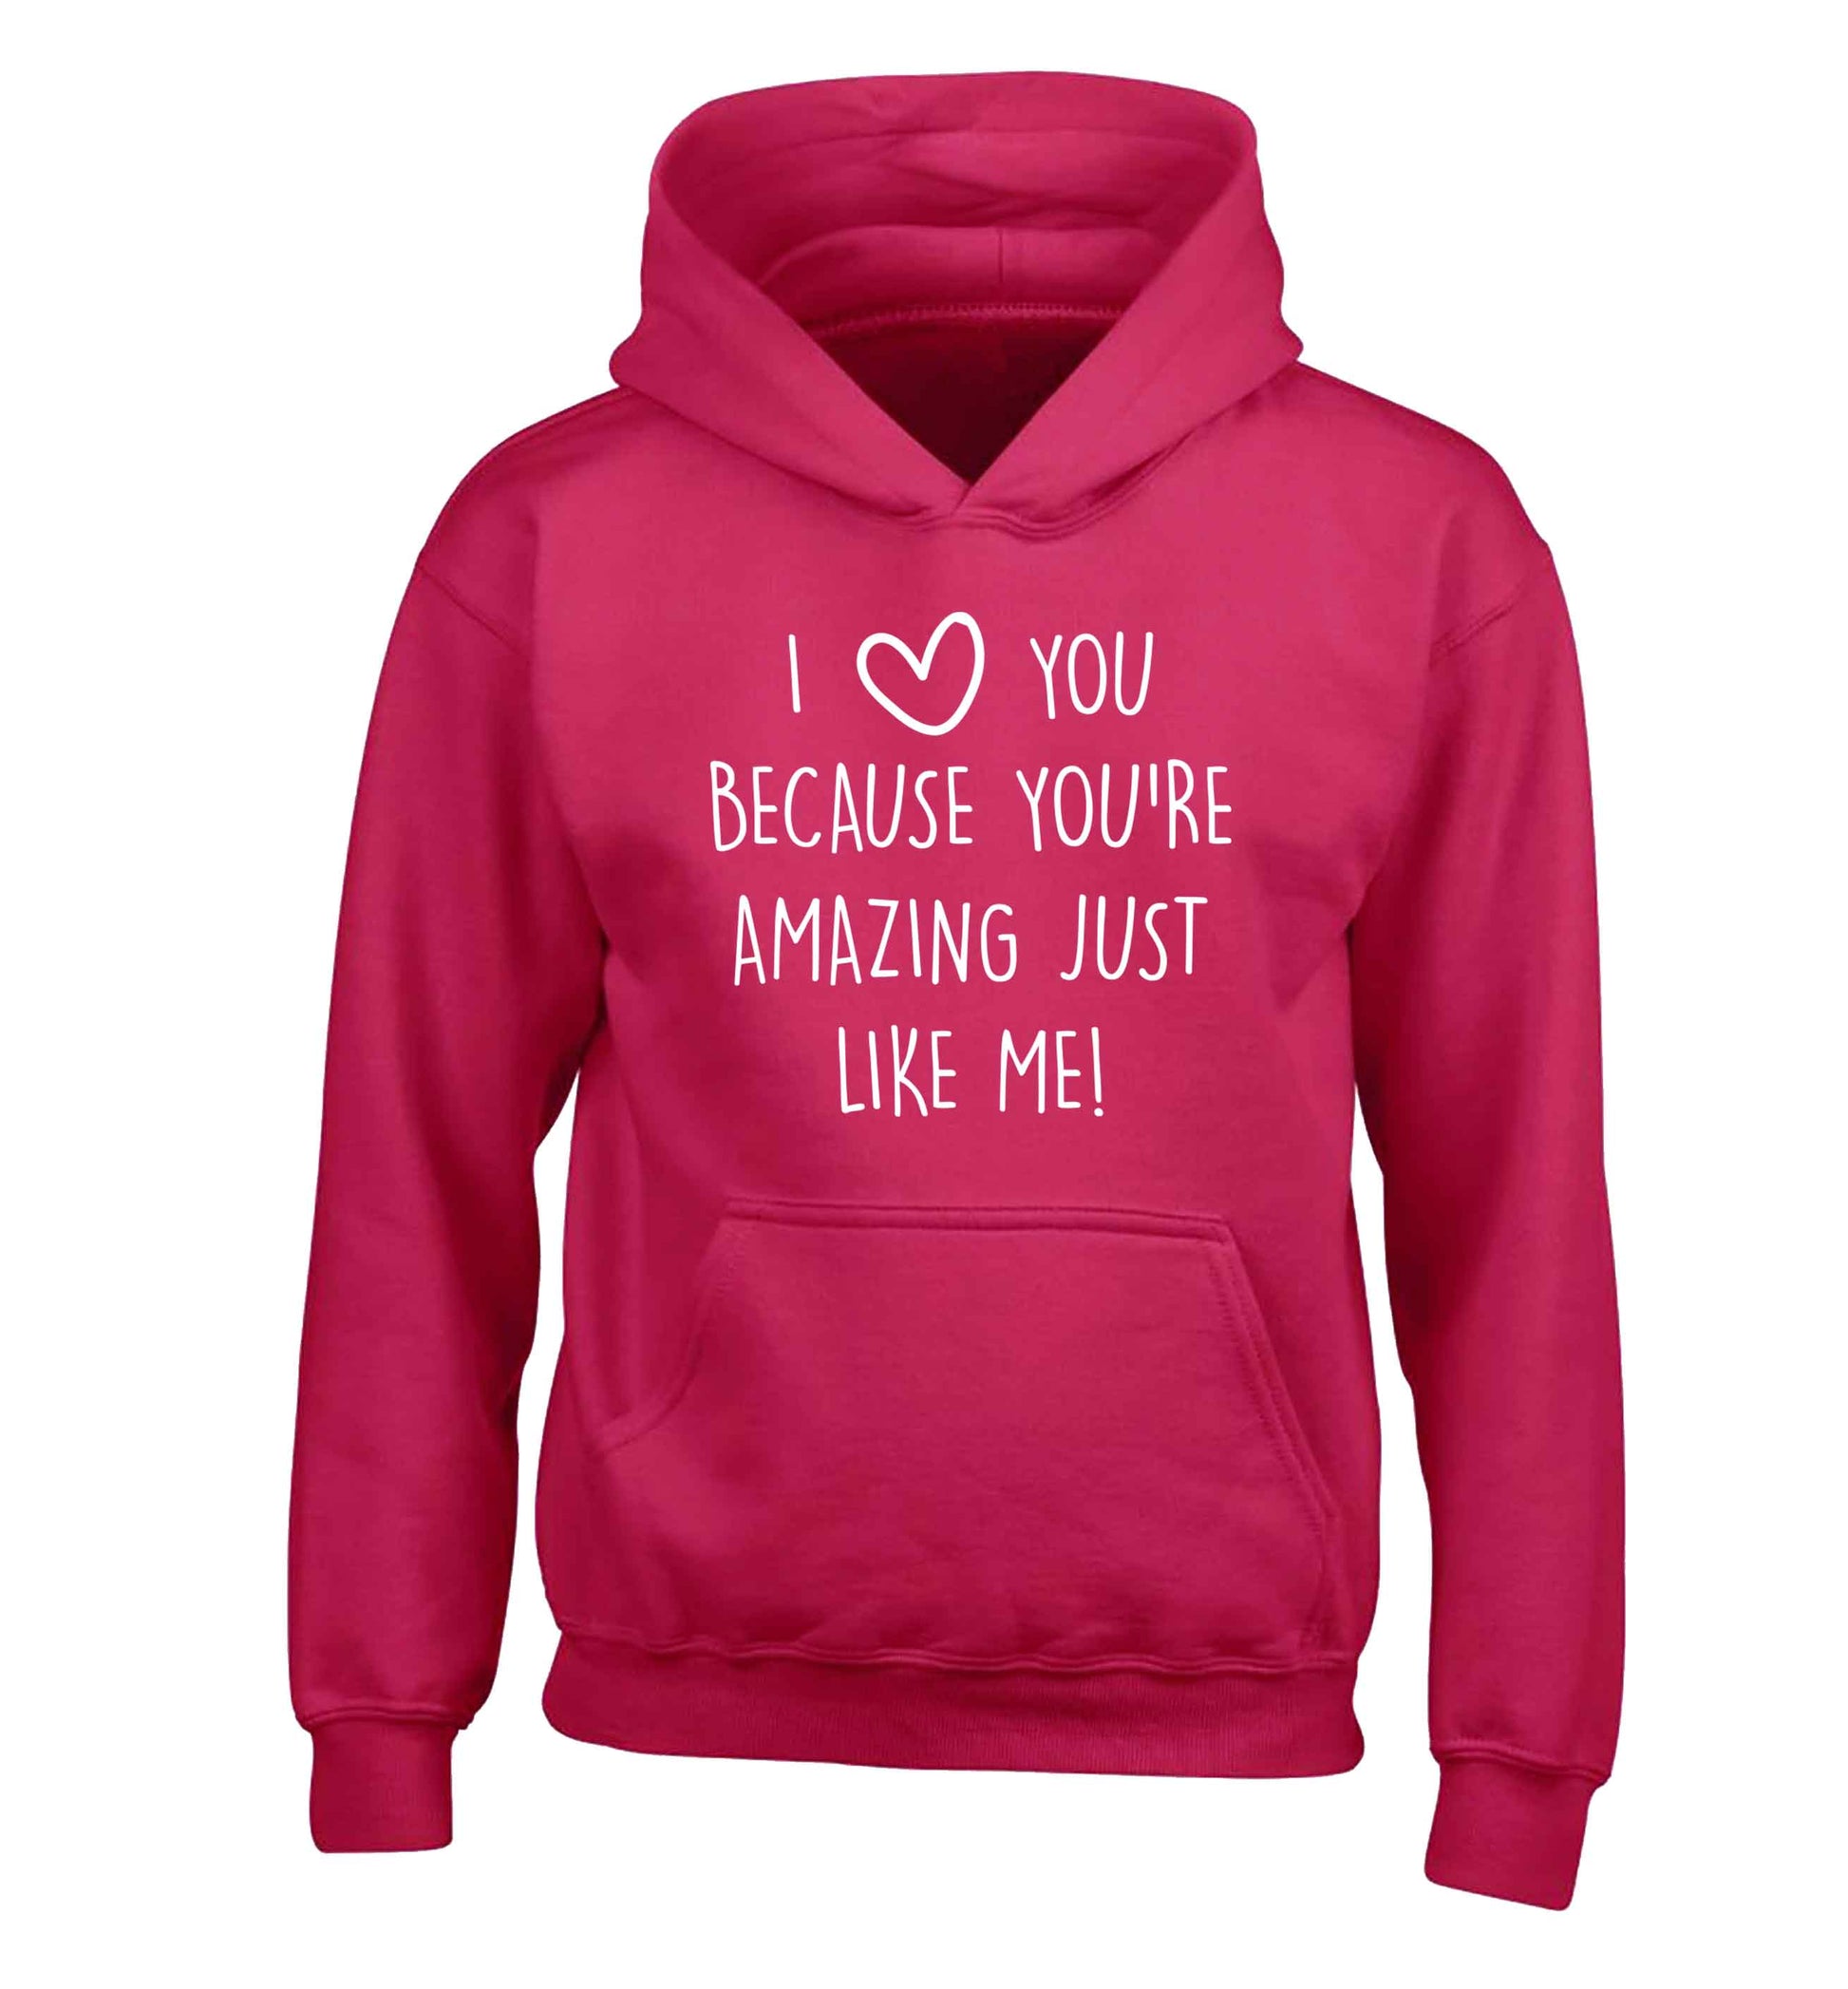 I love you because you're amazing just like me children's pink hoodie 12-13 Years